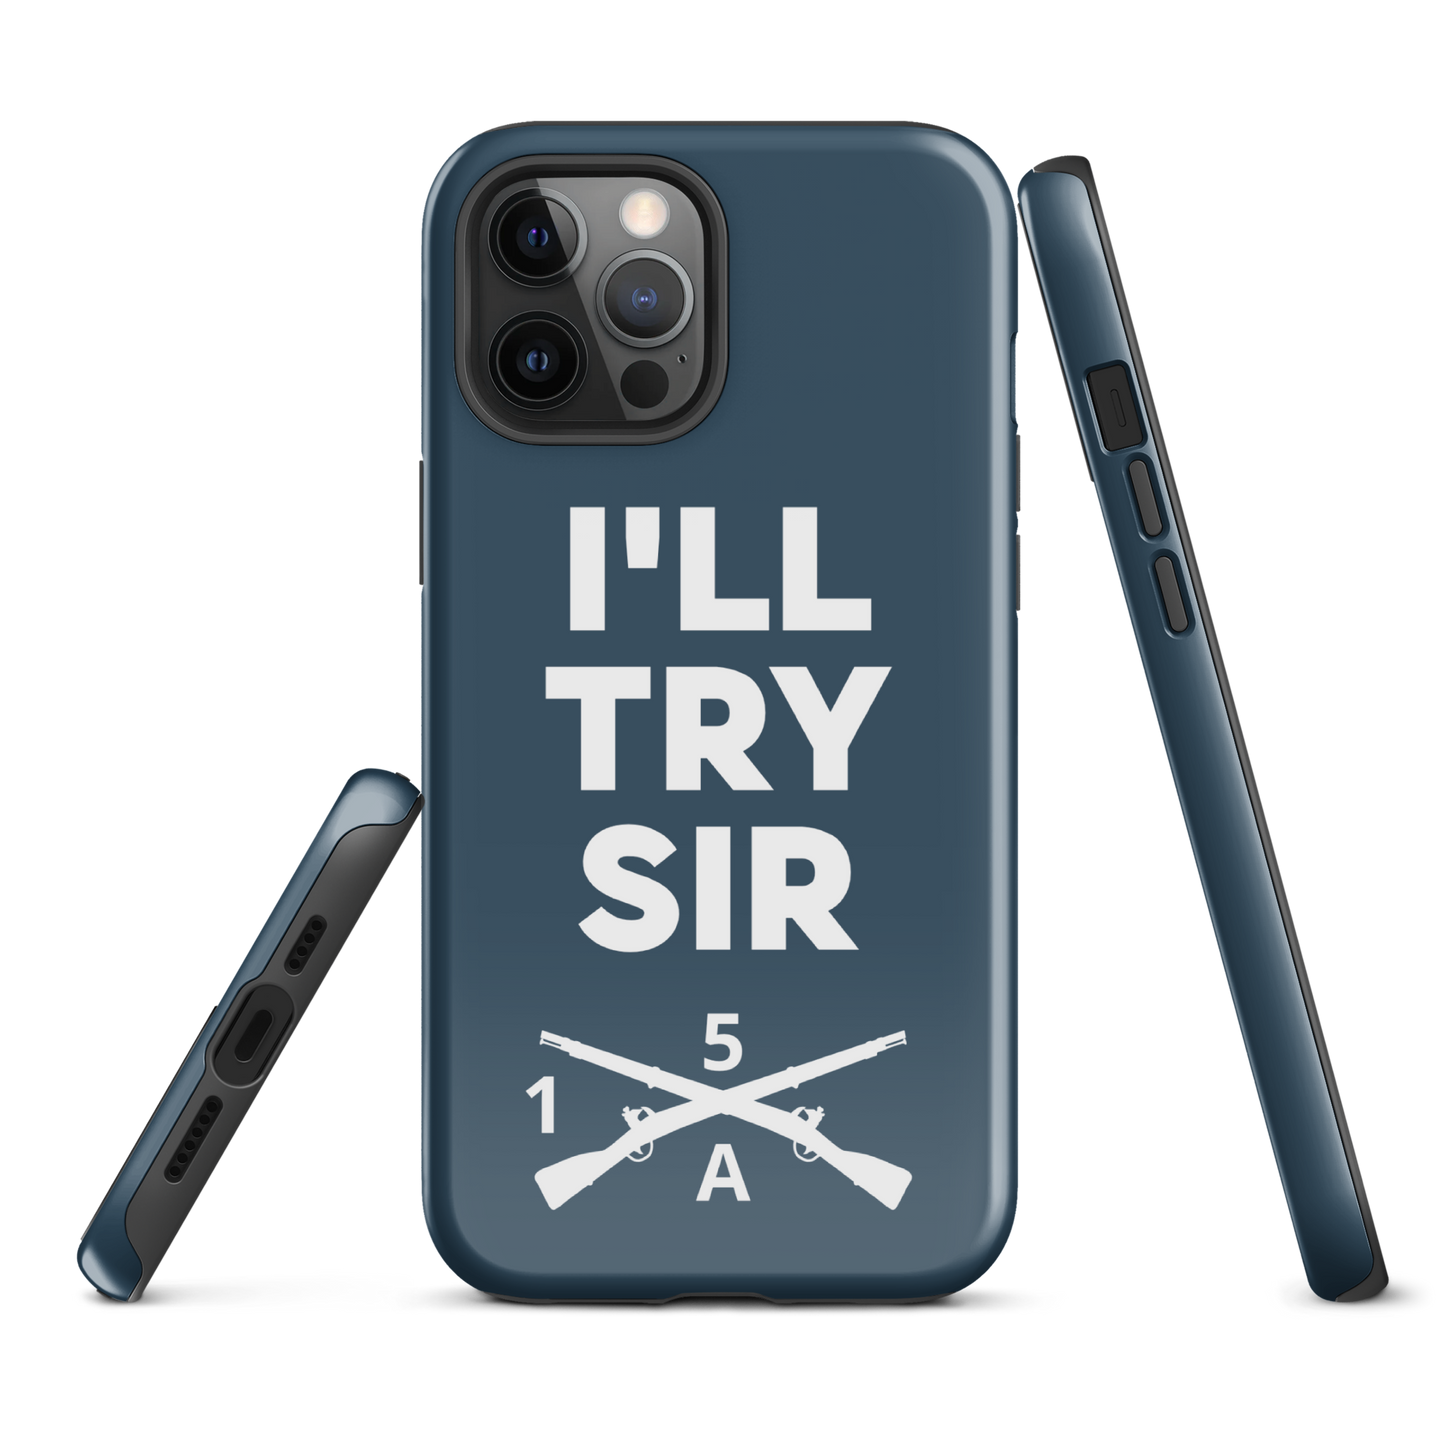 A Co. 1/5 Infantry I'll Try Sir Tough Case for iPhone®